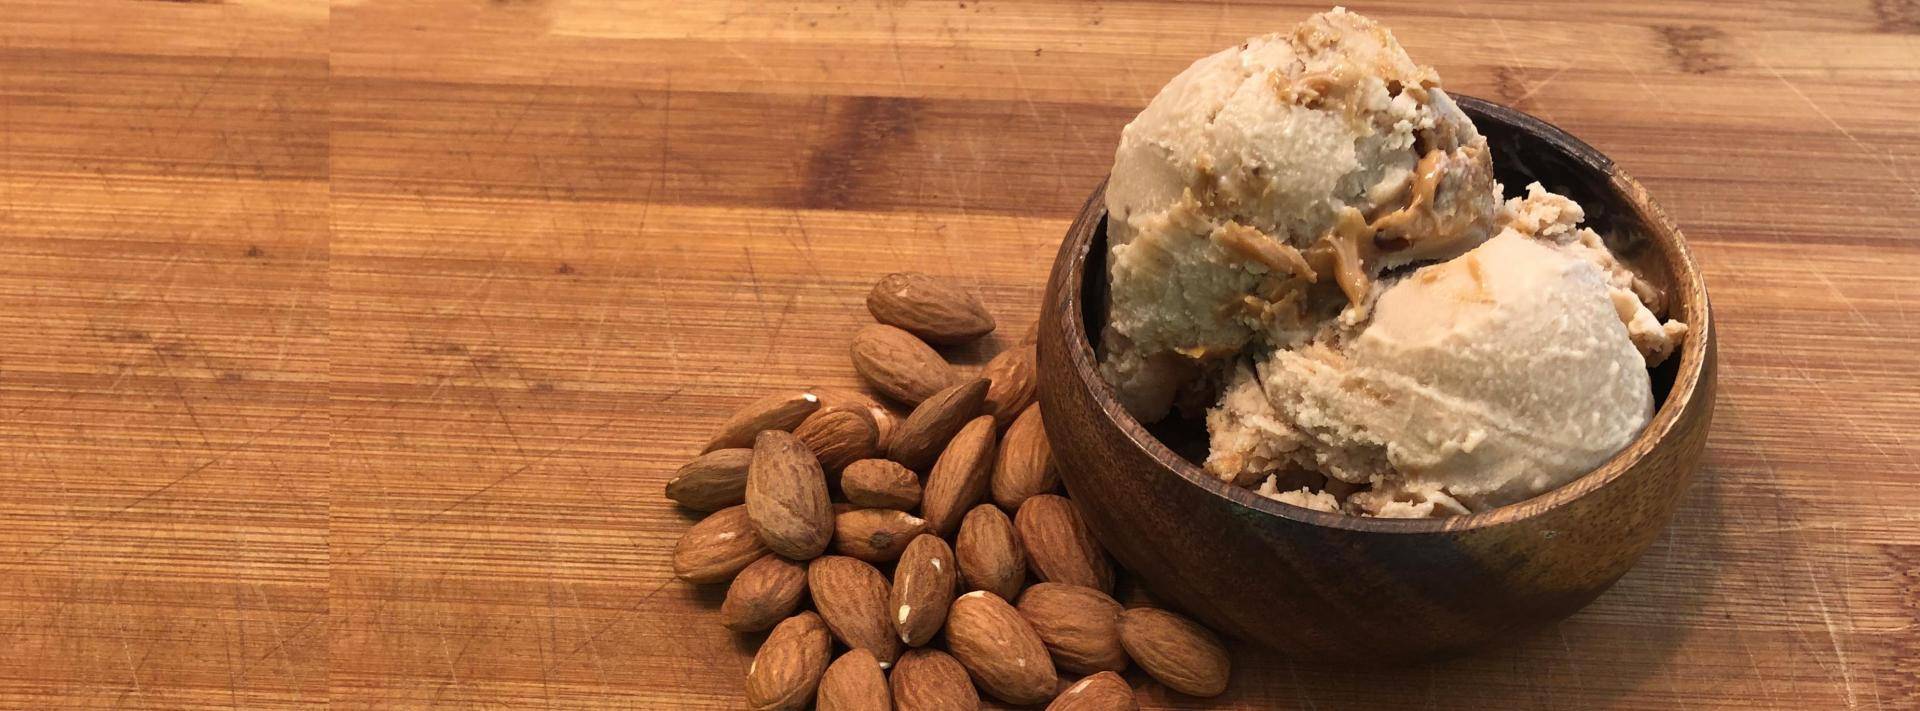 ice cream made with almonds